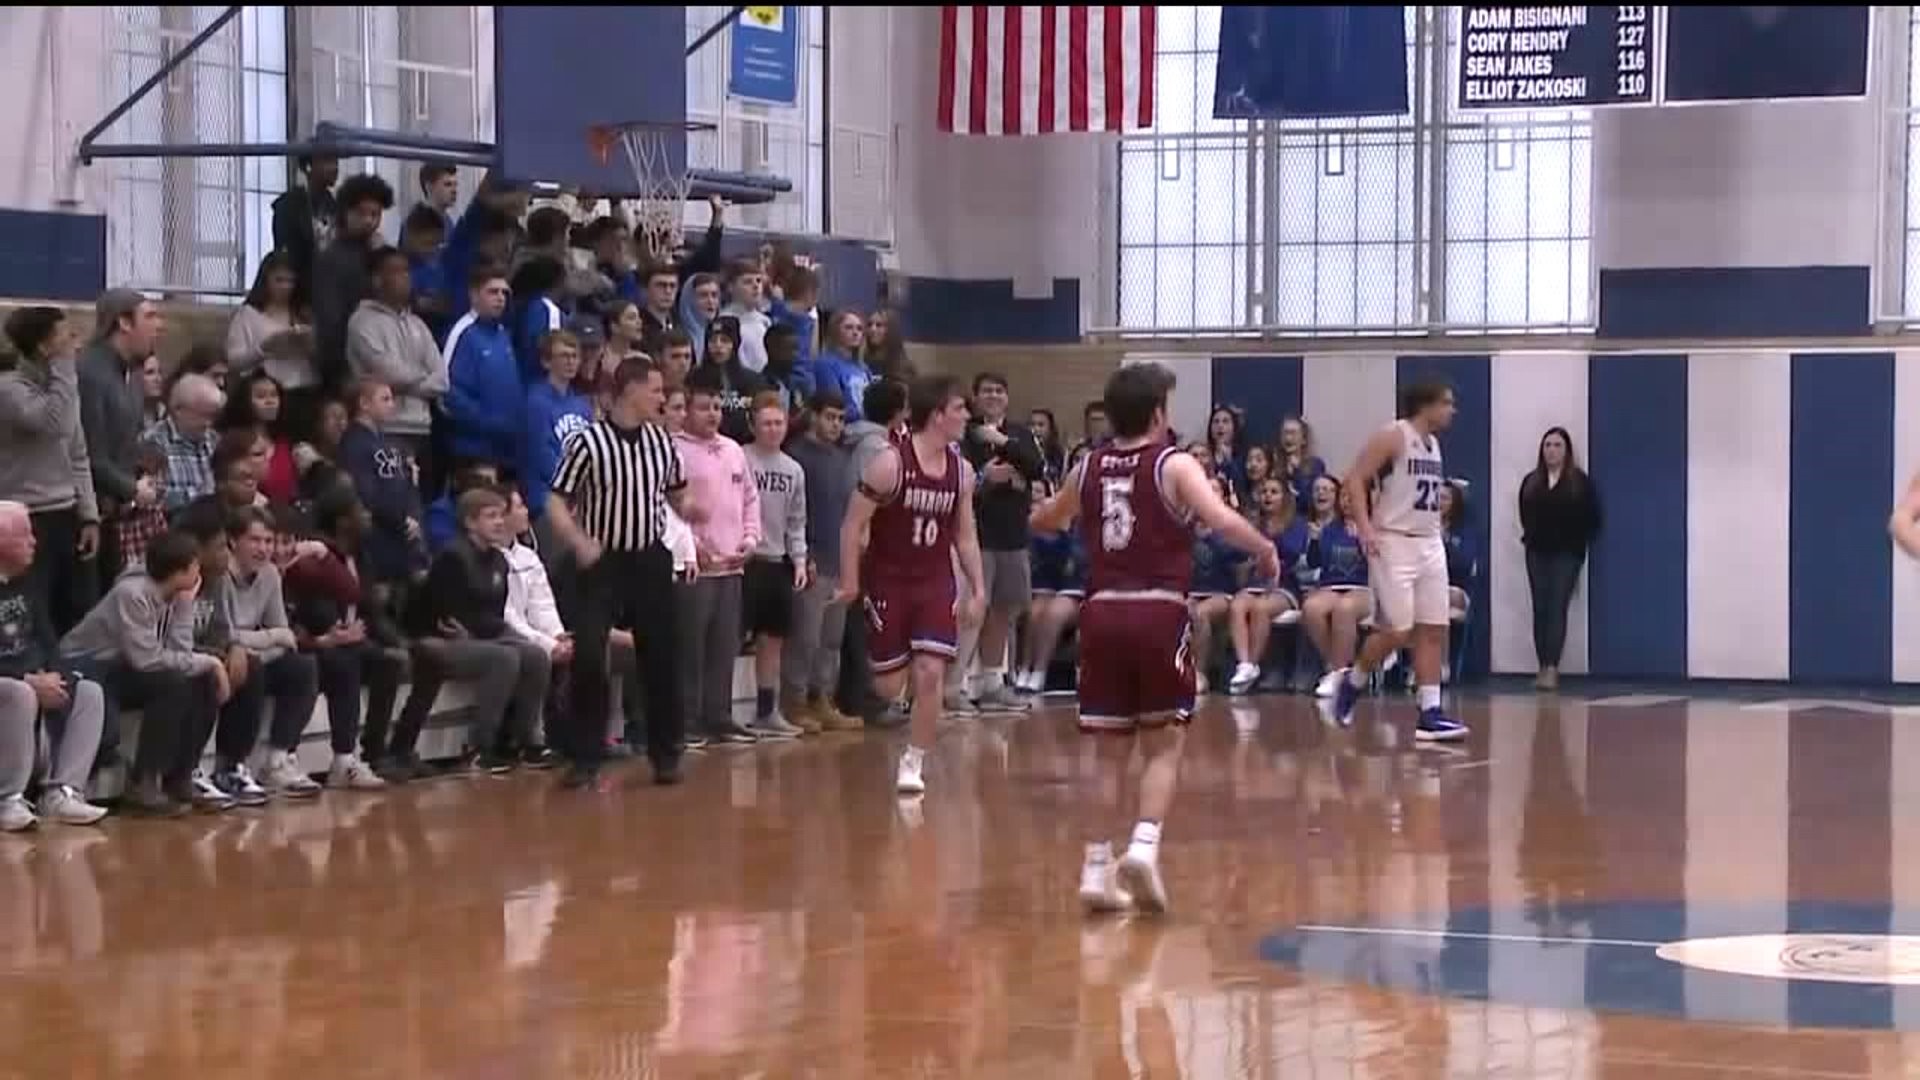 Walsh Leads Dunmore Boys Basketball to 43-35 Win Over West Scranton